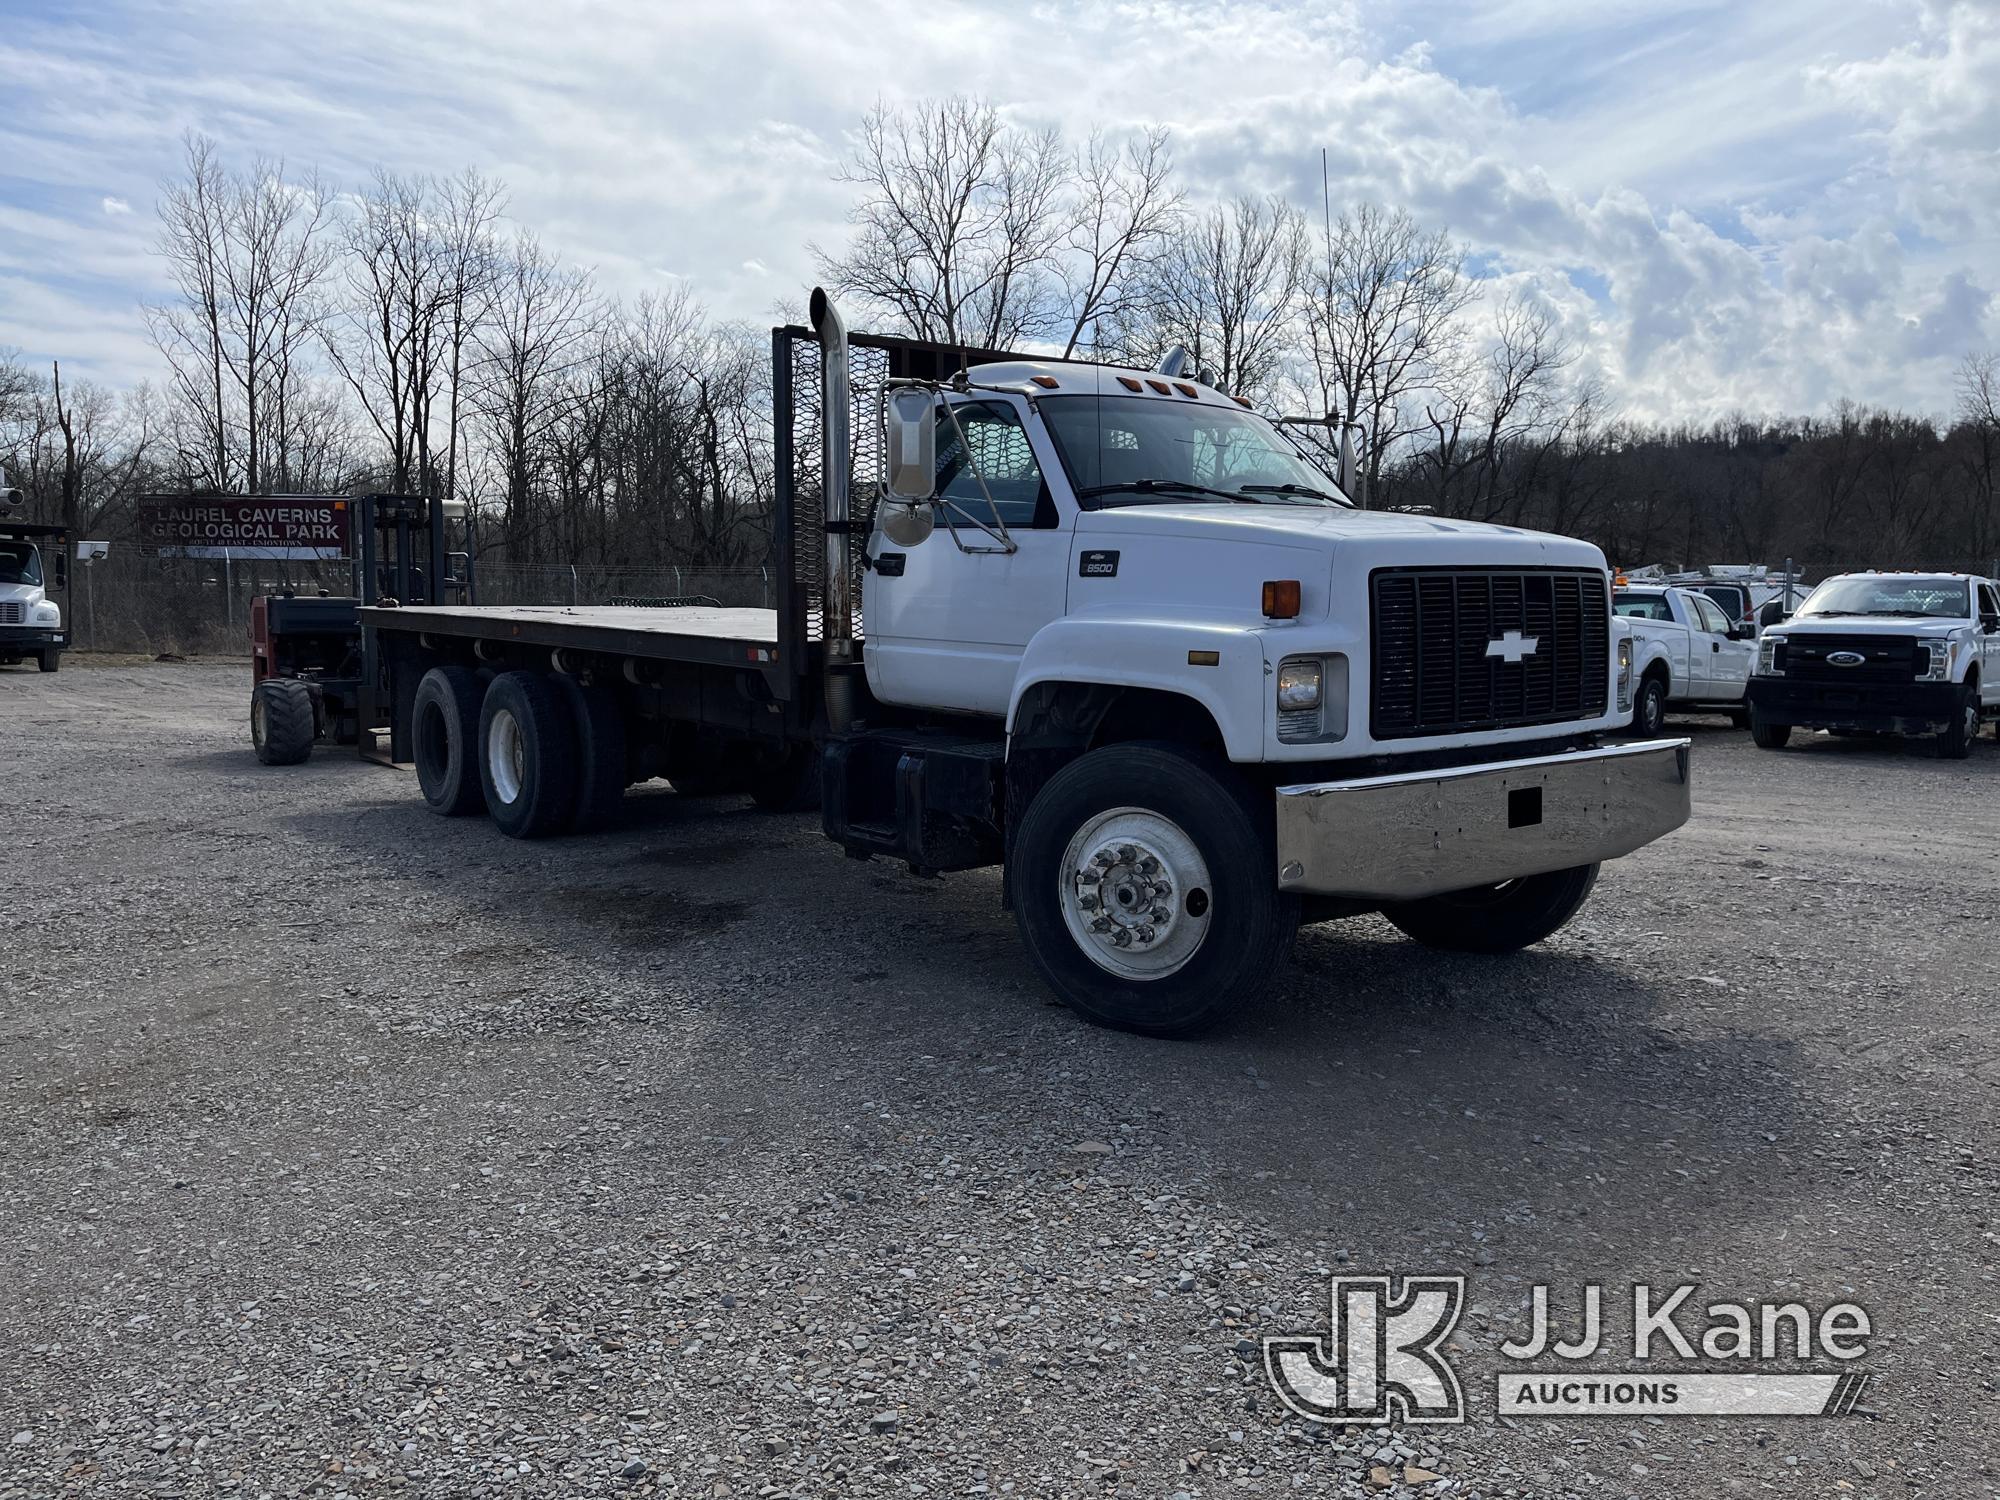 (Smock, PA) 2001 Chevrolet C7H064 Flatbed Truck Runs, Moves & Forklift Operates, Rust Damage